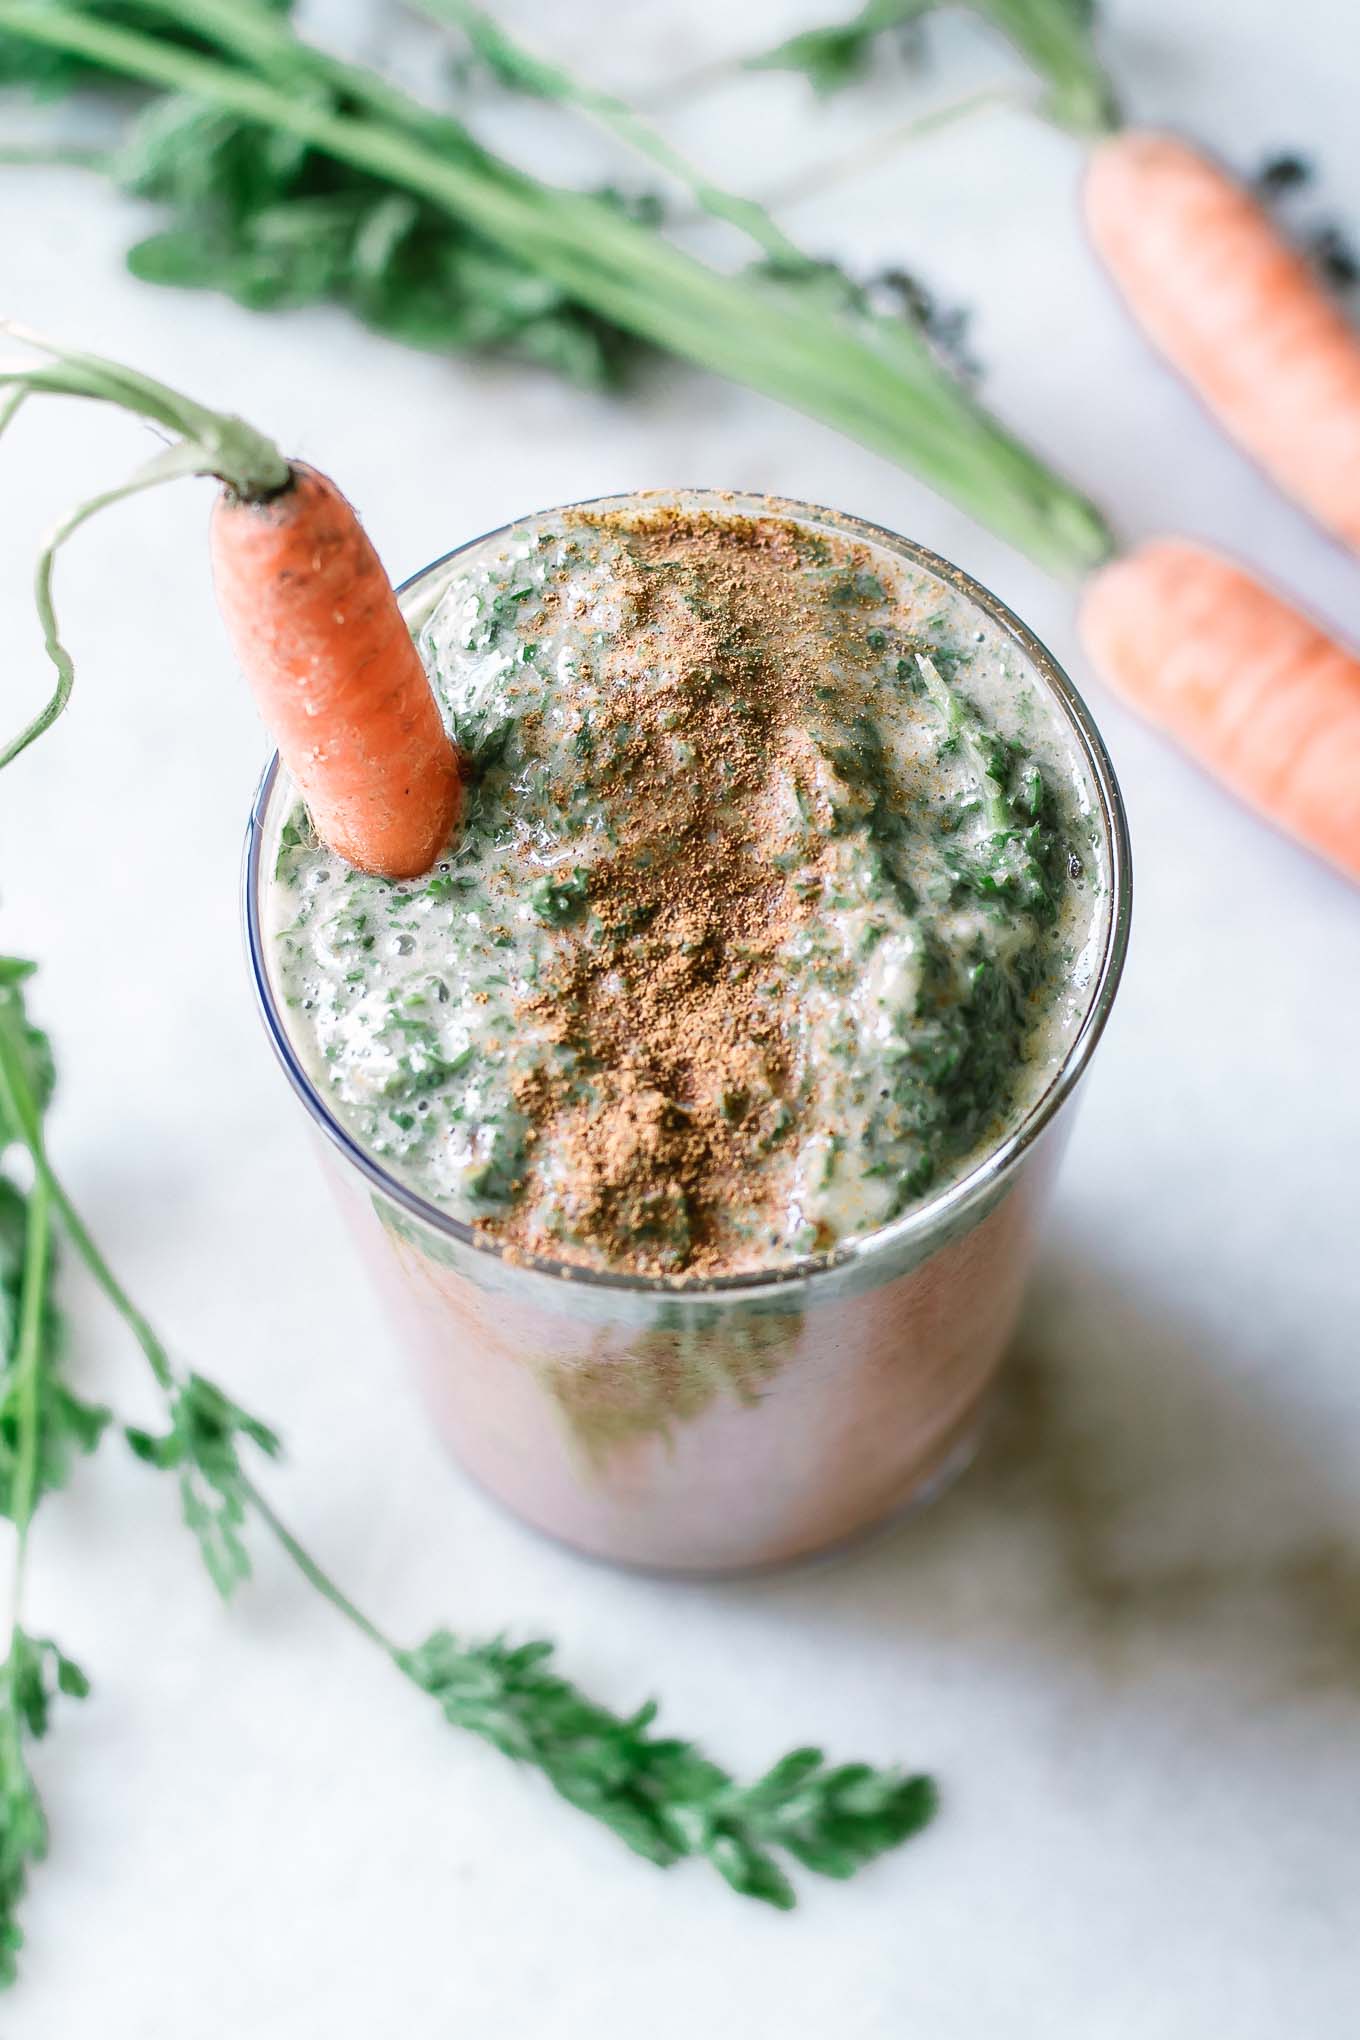 an orange and green carrot top smoothie in a glass with a carrot garnish and sprinkled cinnamon